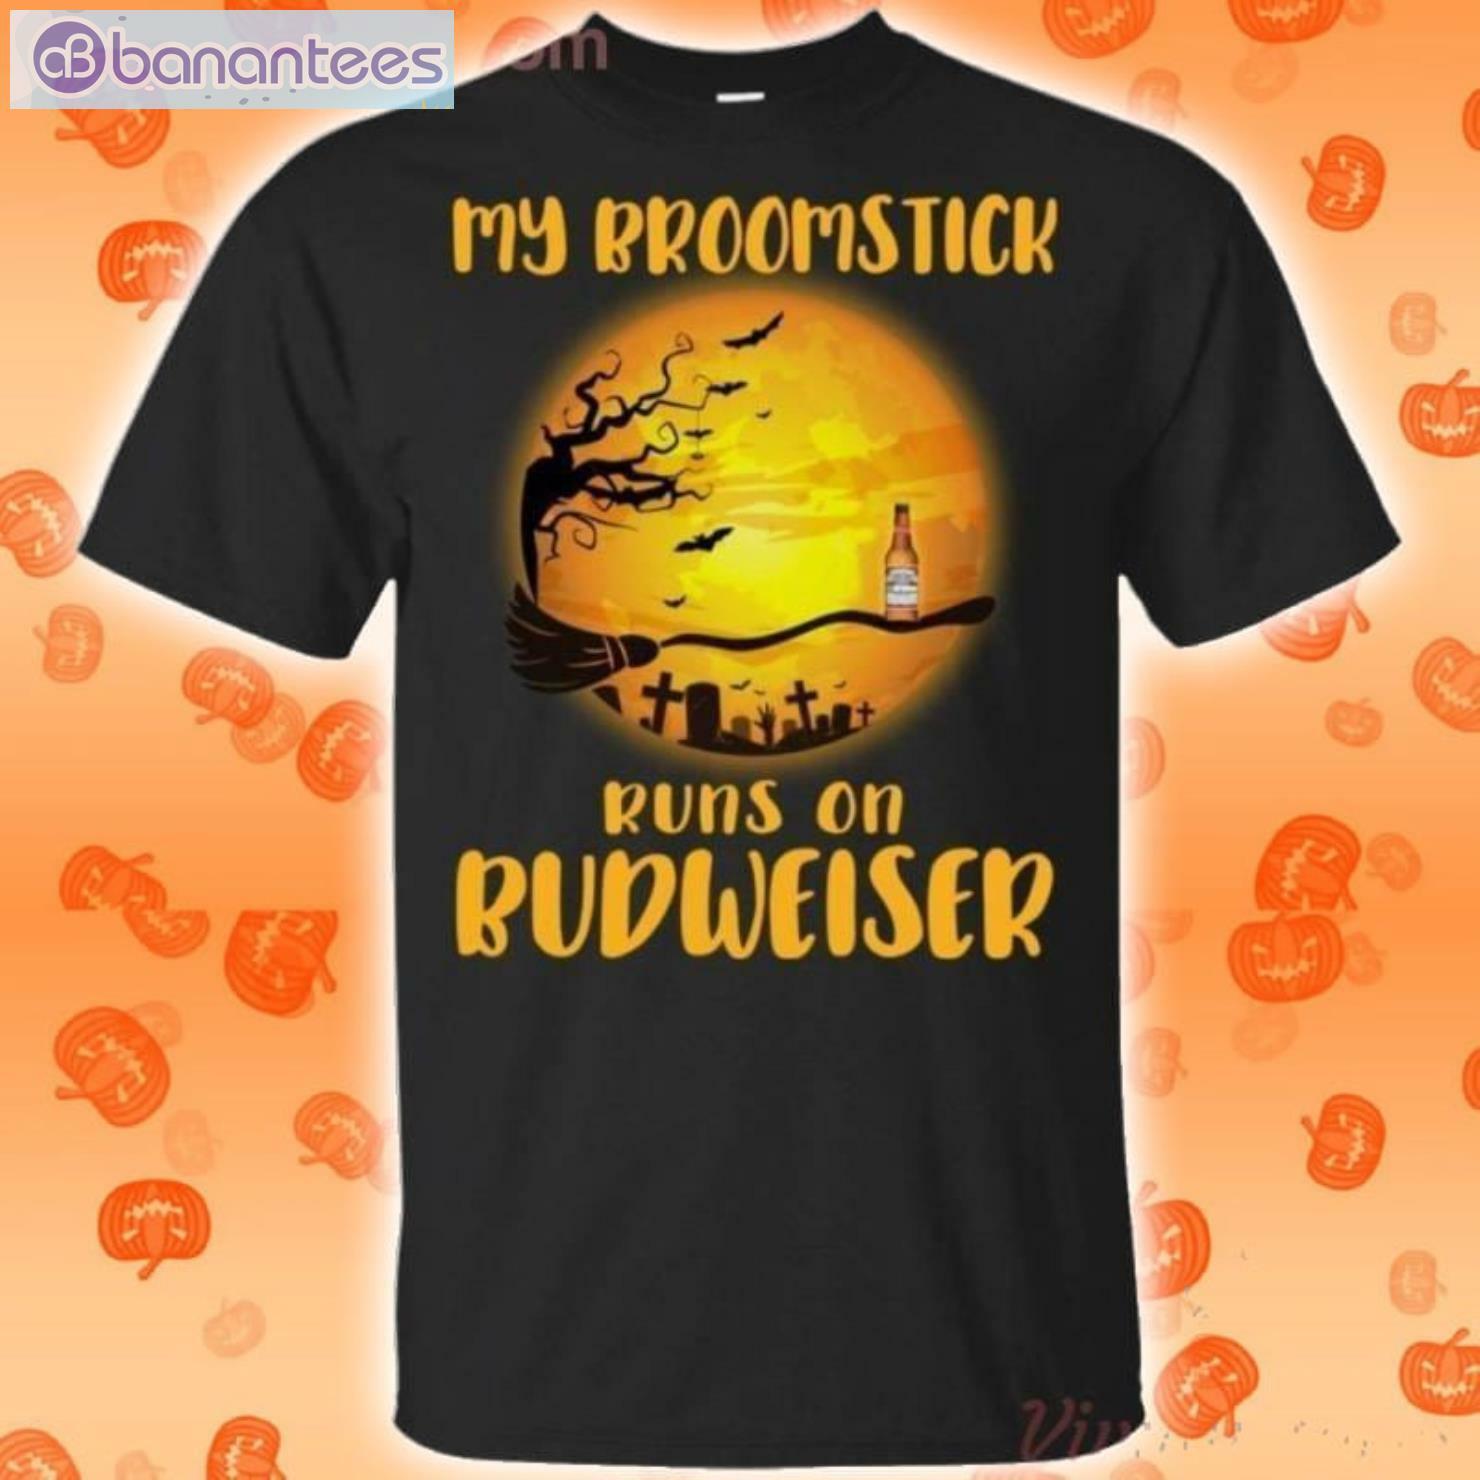 My Broomstick Runs On Budweiser Funny Beer Halloween T-Shirt Product Photo 1 Product photo 1